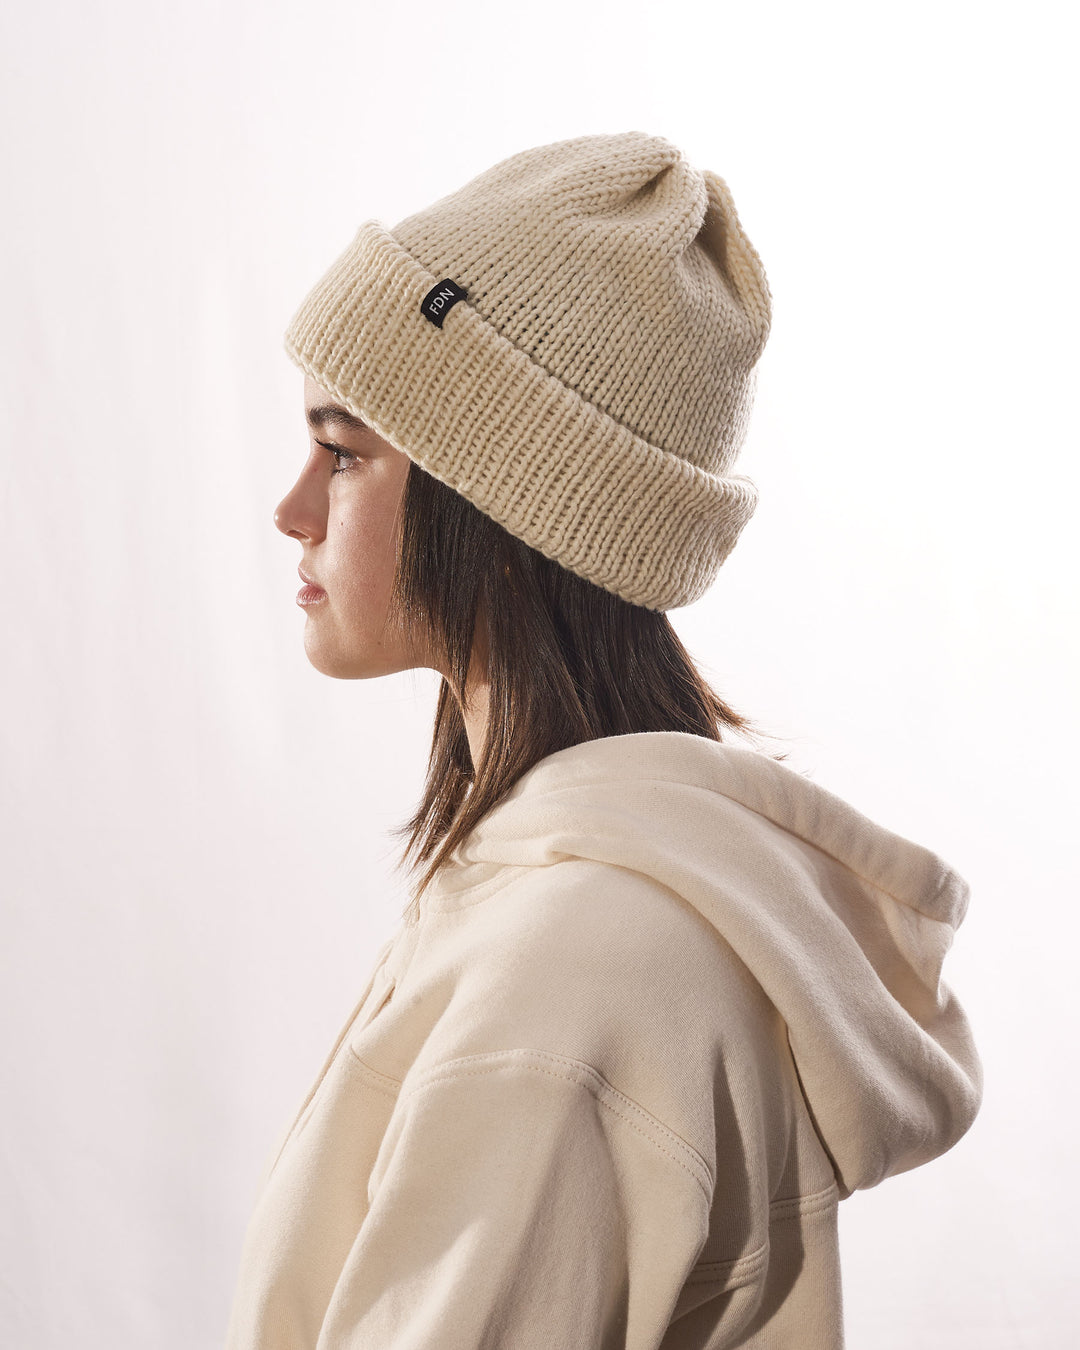 Blanc White Sustainable Mens Womens Winter Hat Beanie Comfortable Luxury White Yarn Soft Fabriqué au Canada. Clothing Made in Canada canadian made toques FDN Label Tag Tab Clothing